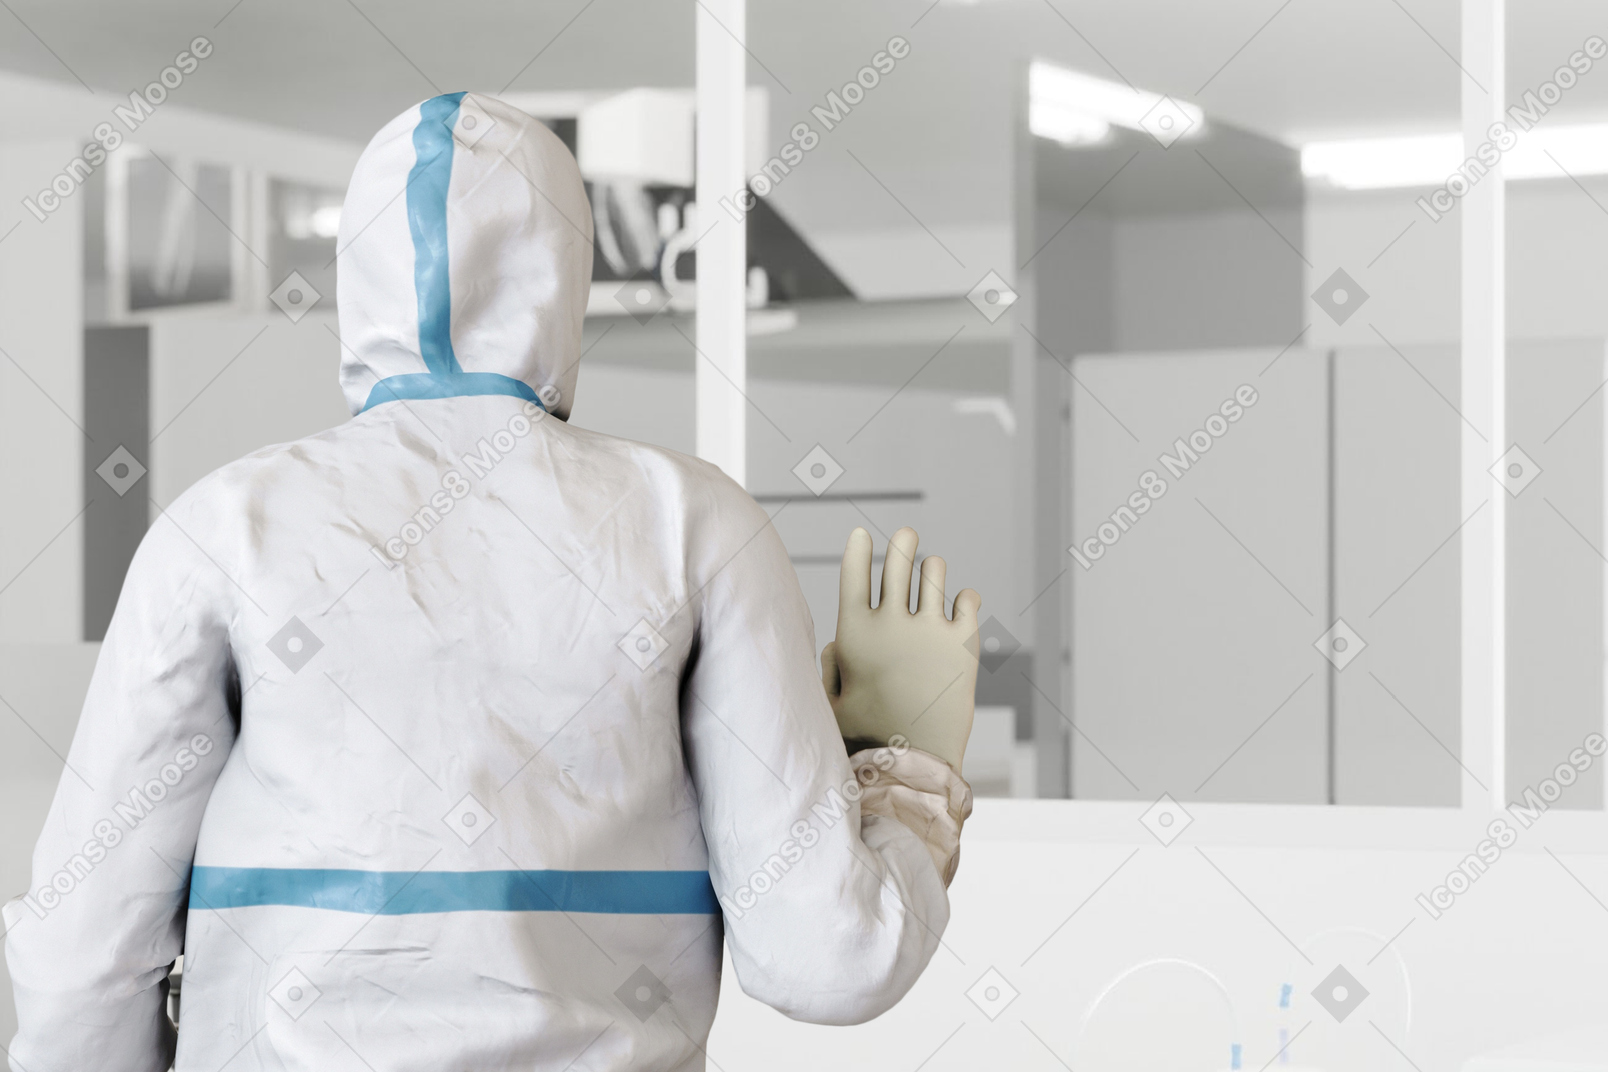 A person in a white suit and gloves